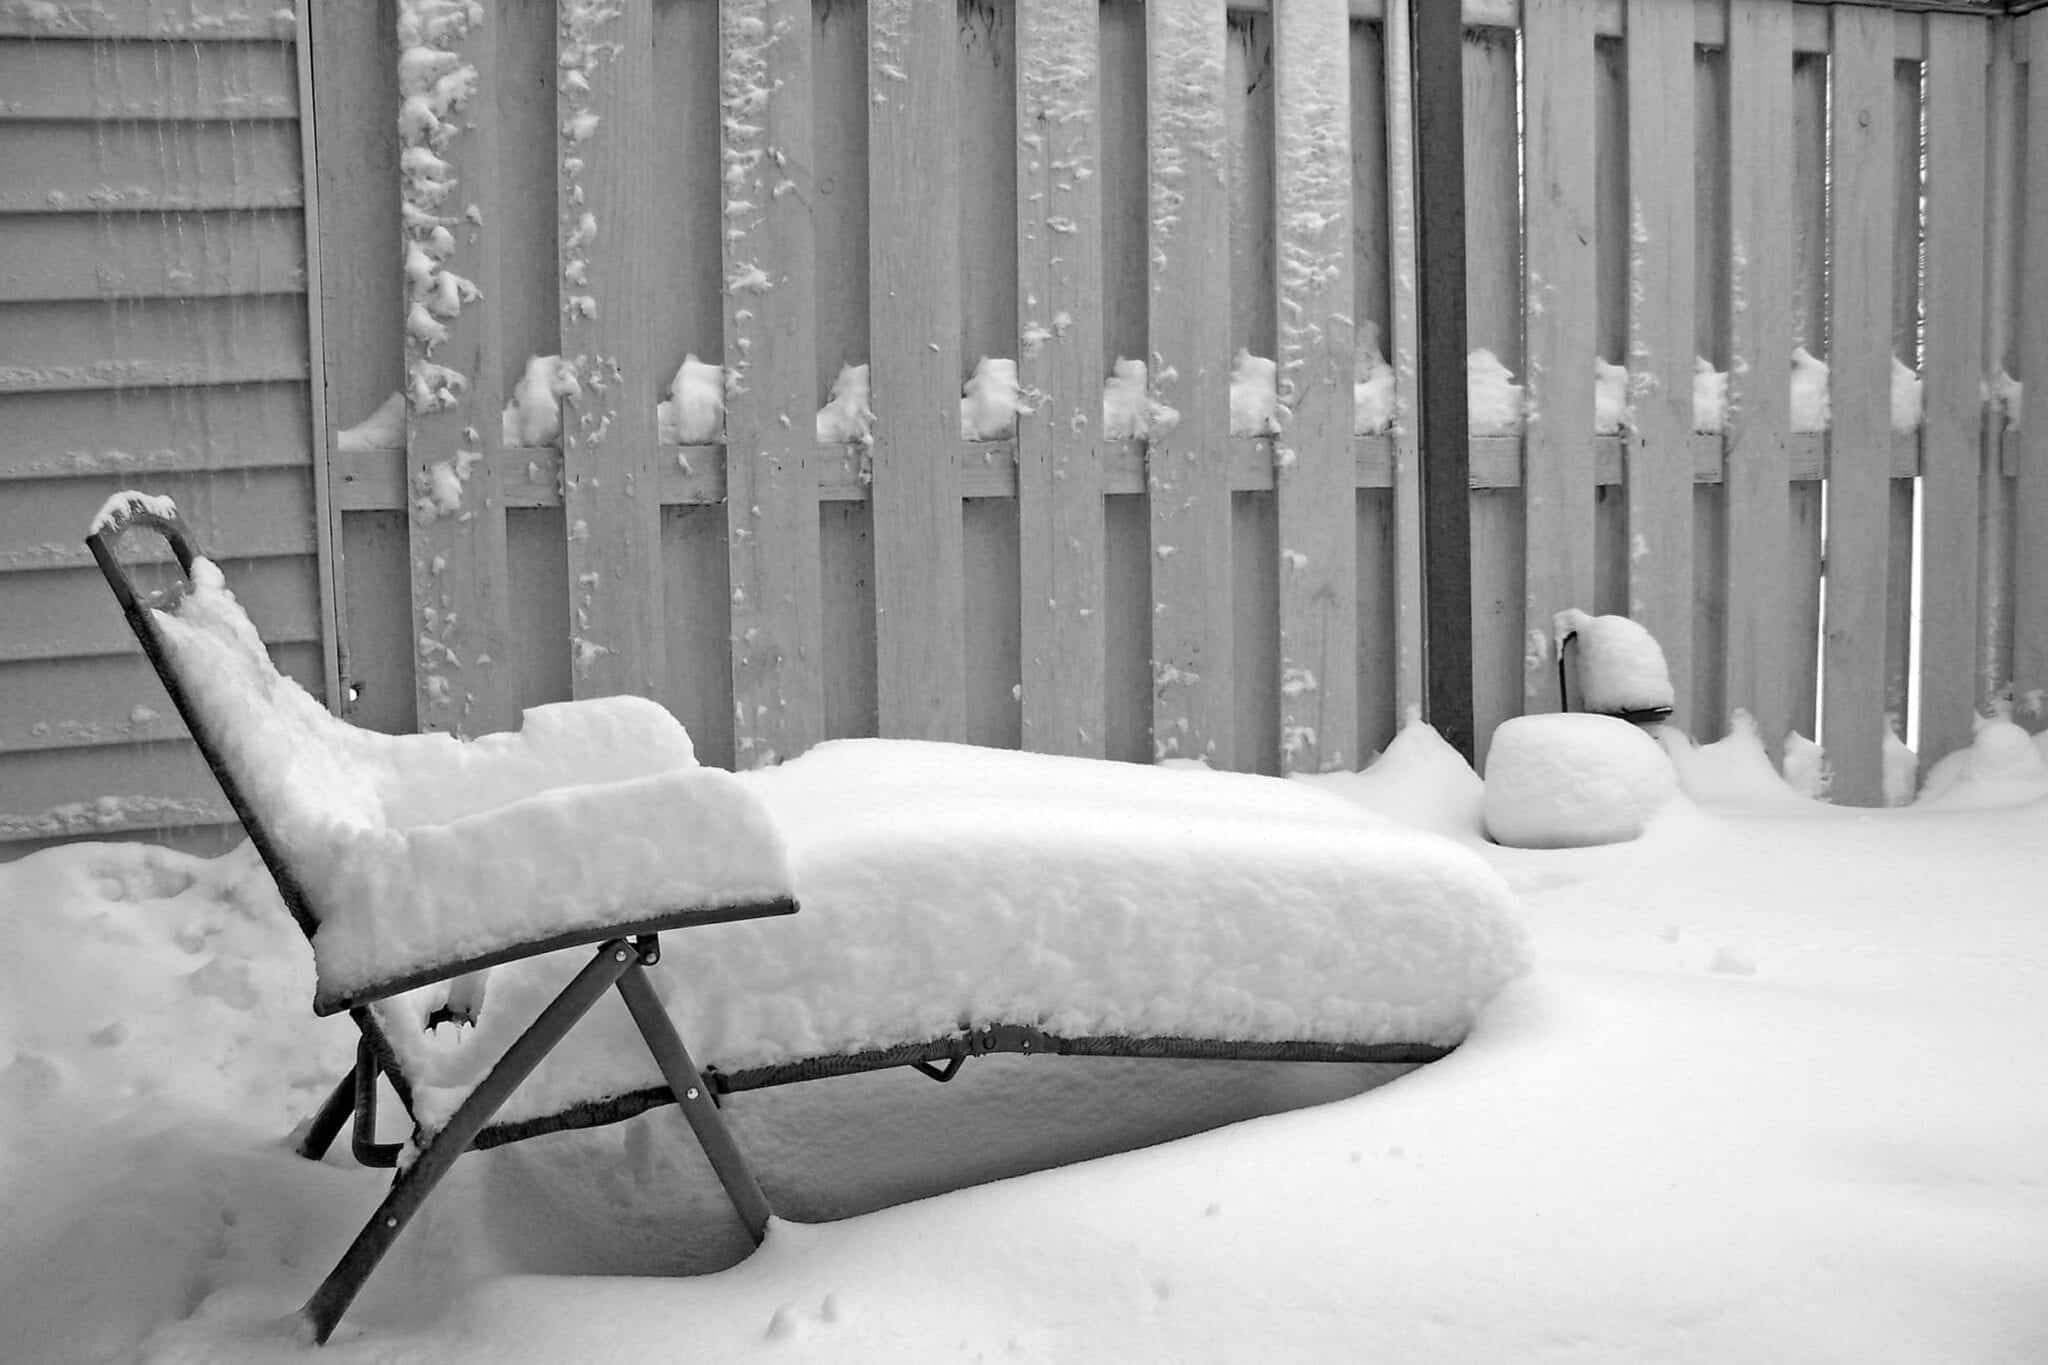 Winter Proof Your Patio